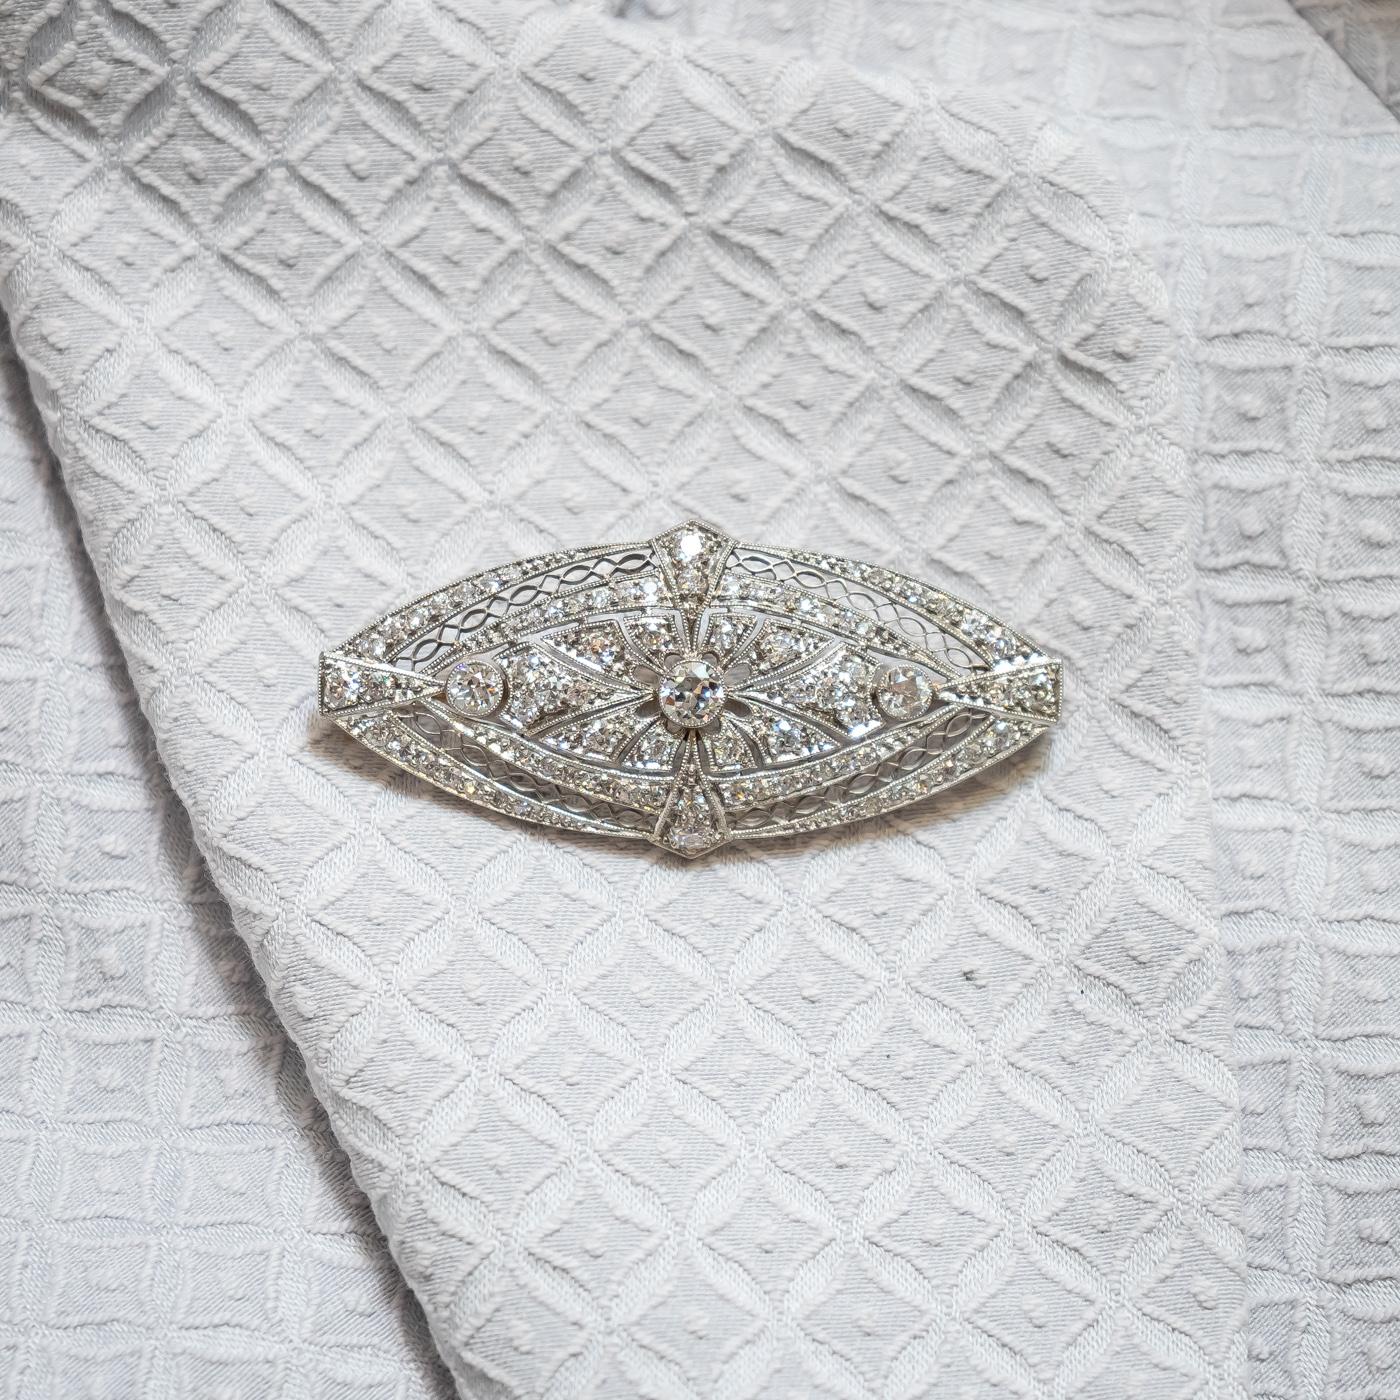 An Art Deco diamond brooch, set with Edwardian-cut diamonds, in an open work, navette shaped plaque, mounted in platinum, circa 1925, with a gold pin, numbered 8994, with inventory number 1678. Estimated total diamond weight 2.50ct.
